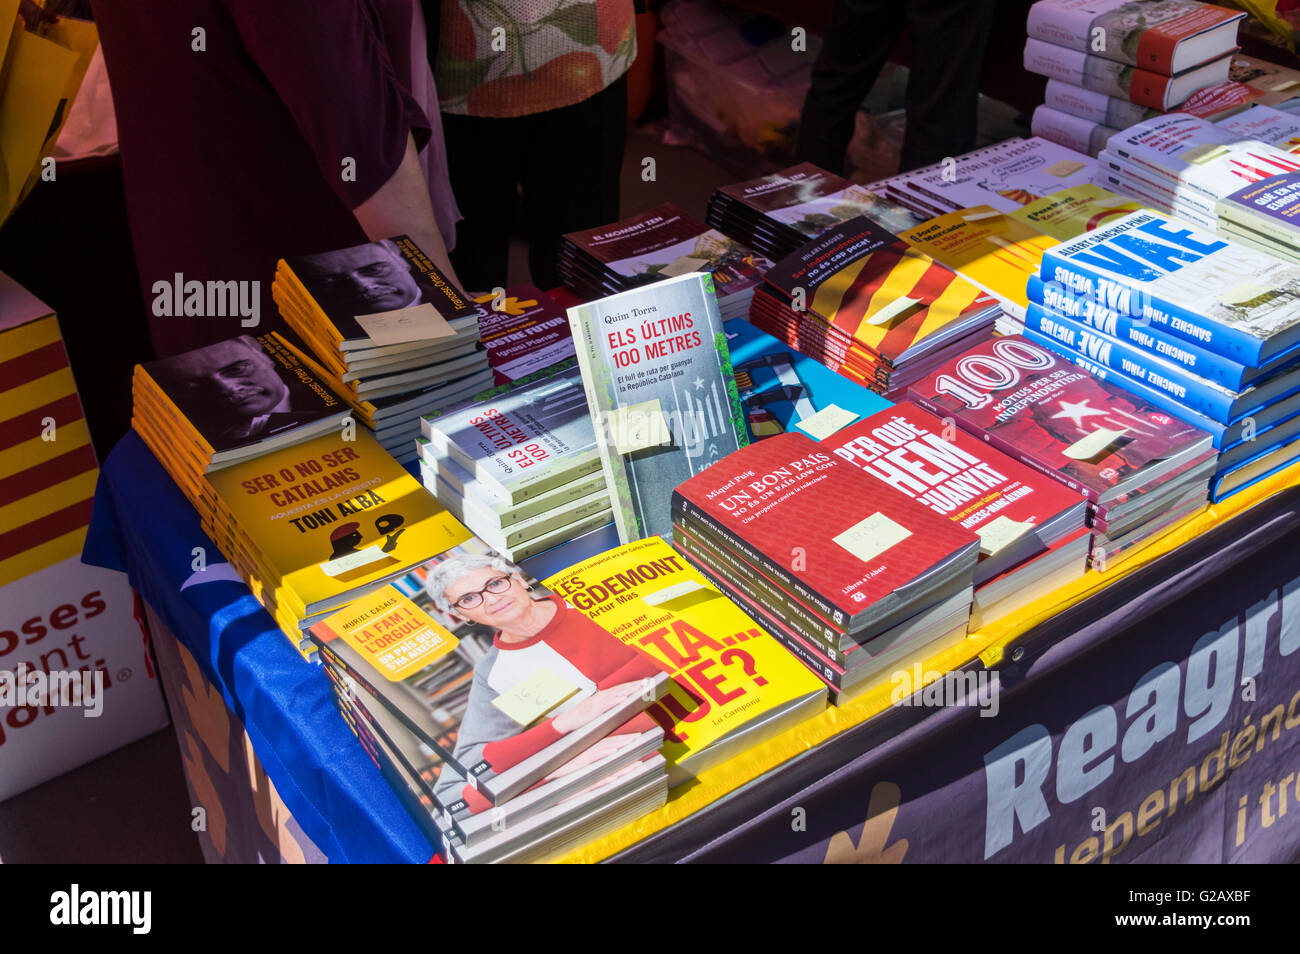 Books about Catalan nationalism and independence of Catalonia on display at an outdoor booth in Barcelona, Catalonia, Spain. Stock Photo